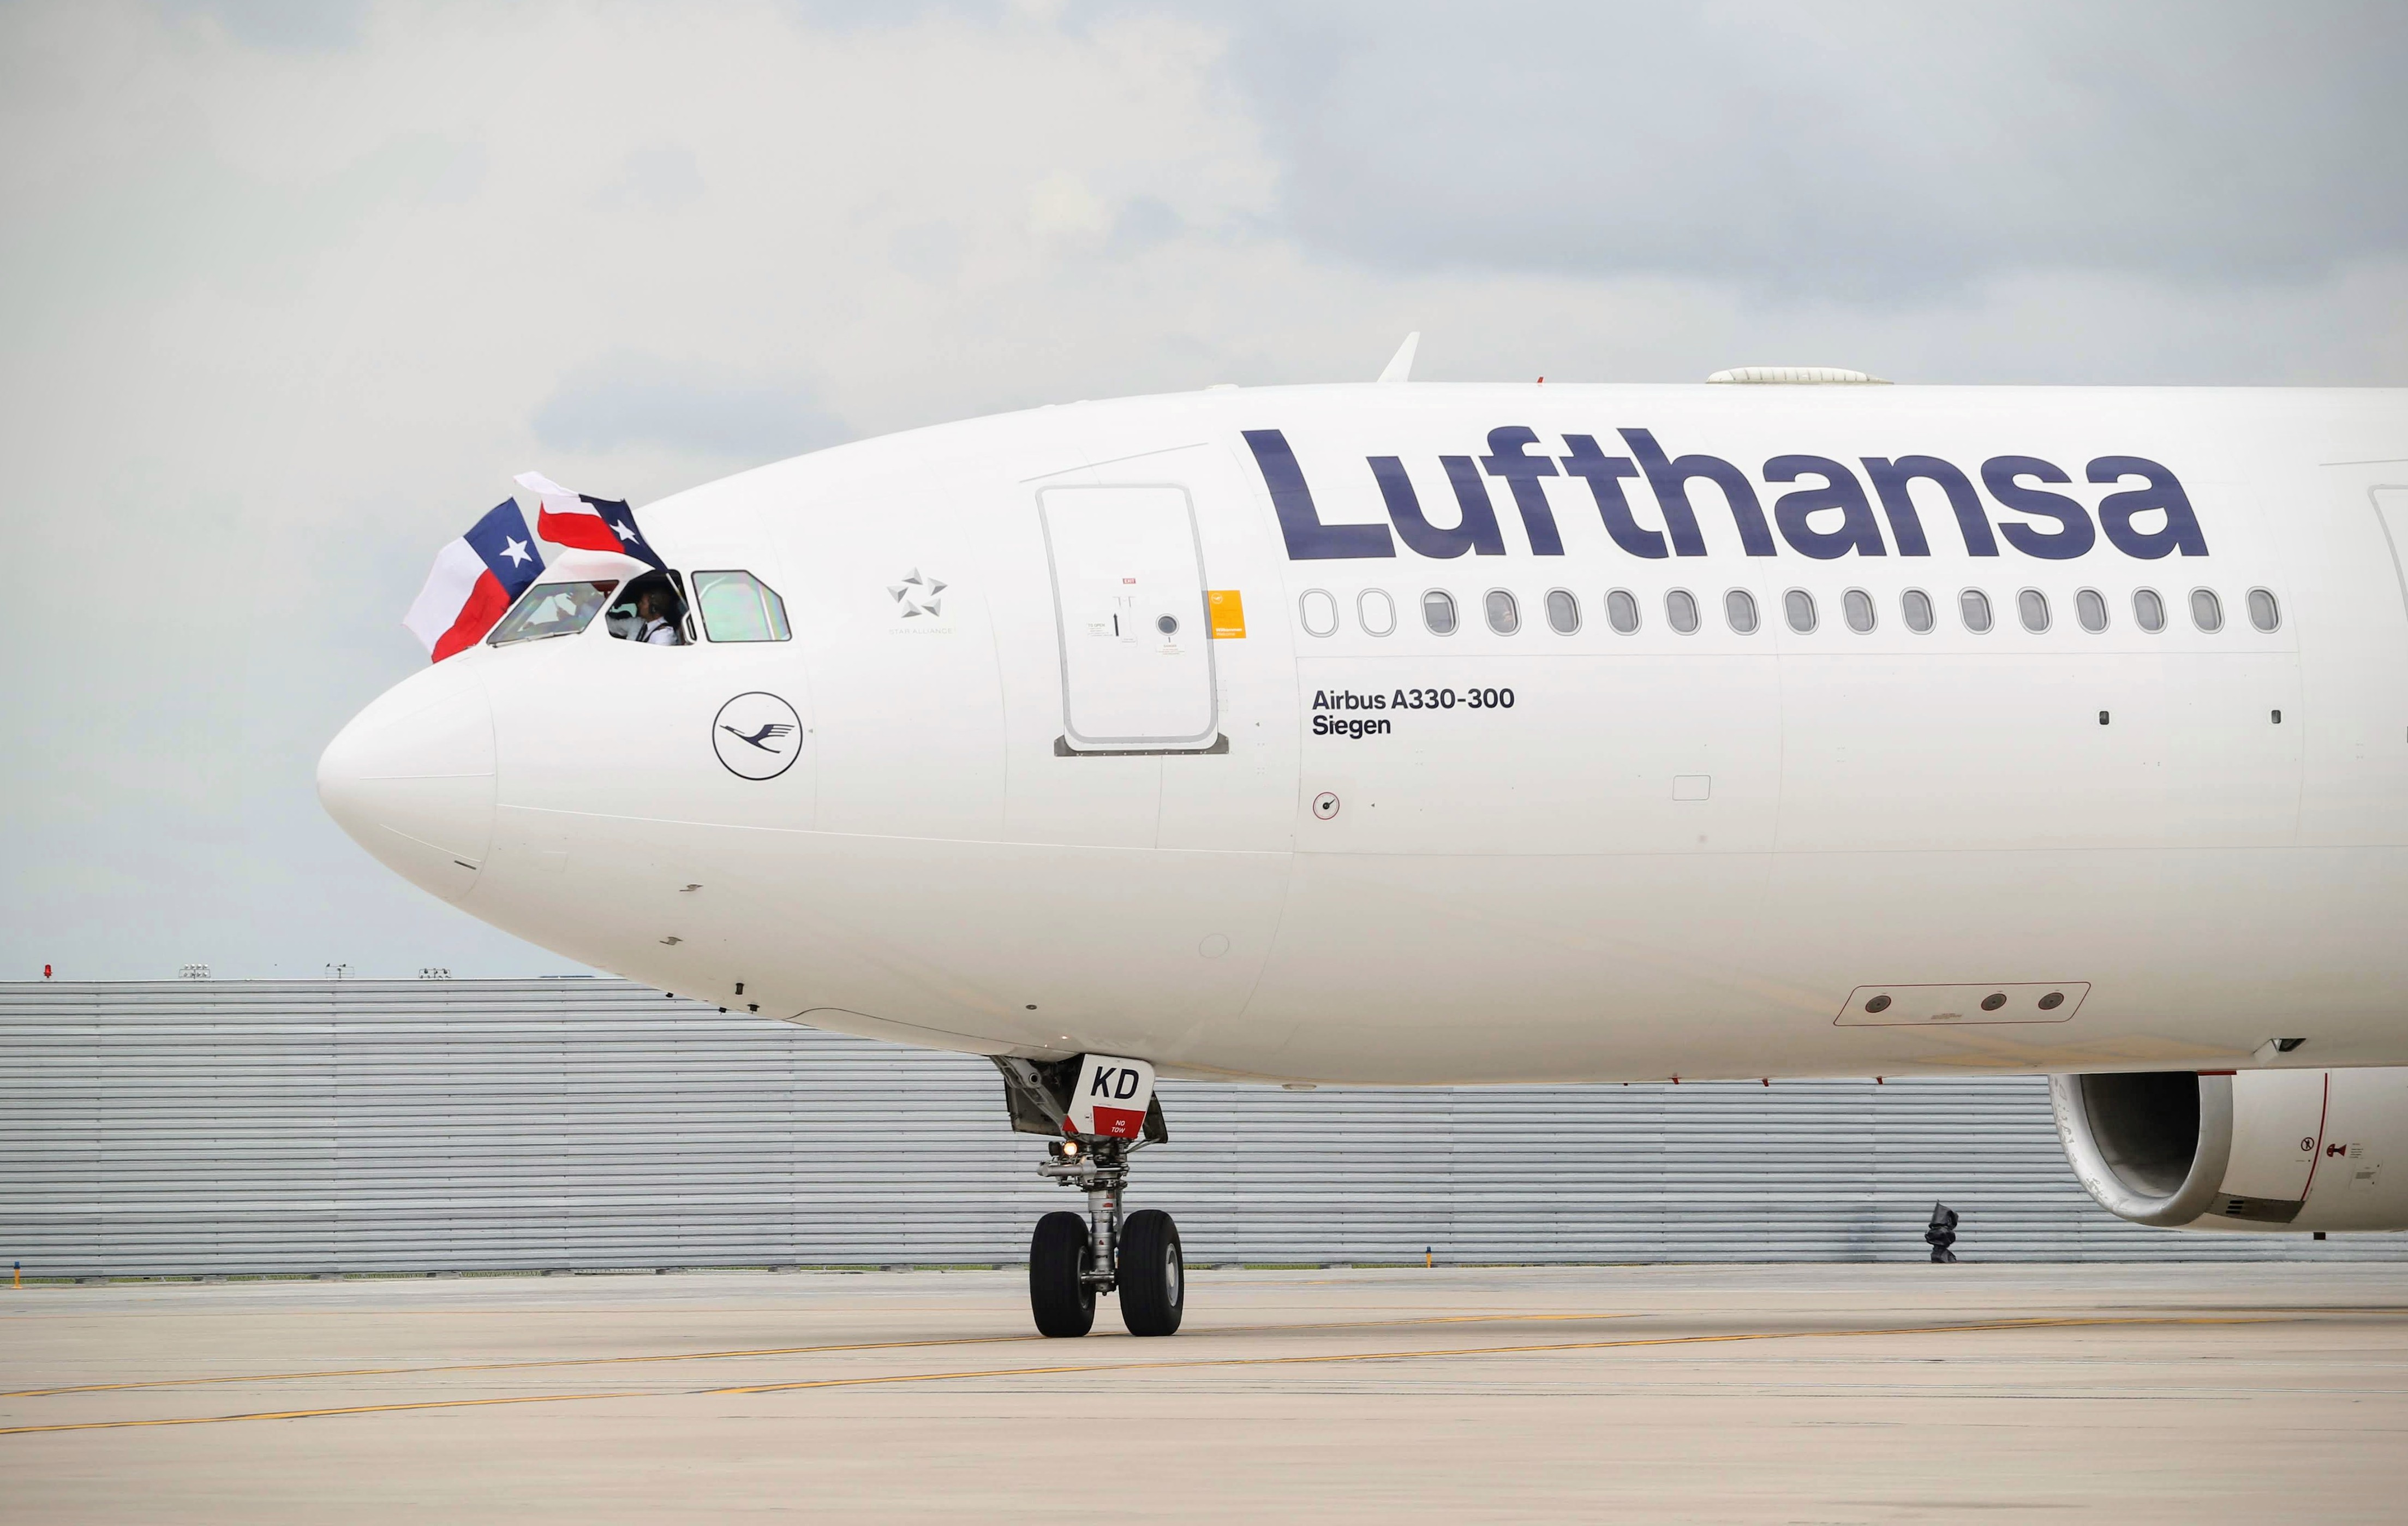 Photo of a Lufthansa airplane on a taxiway. National flags are being held outside of the cockpit of the plane.